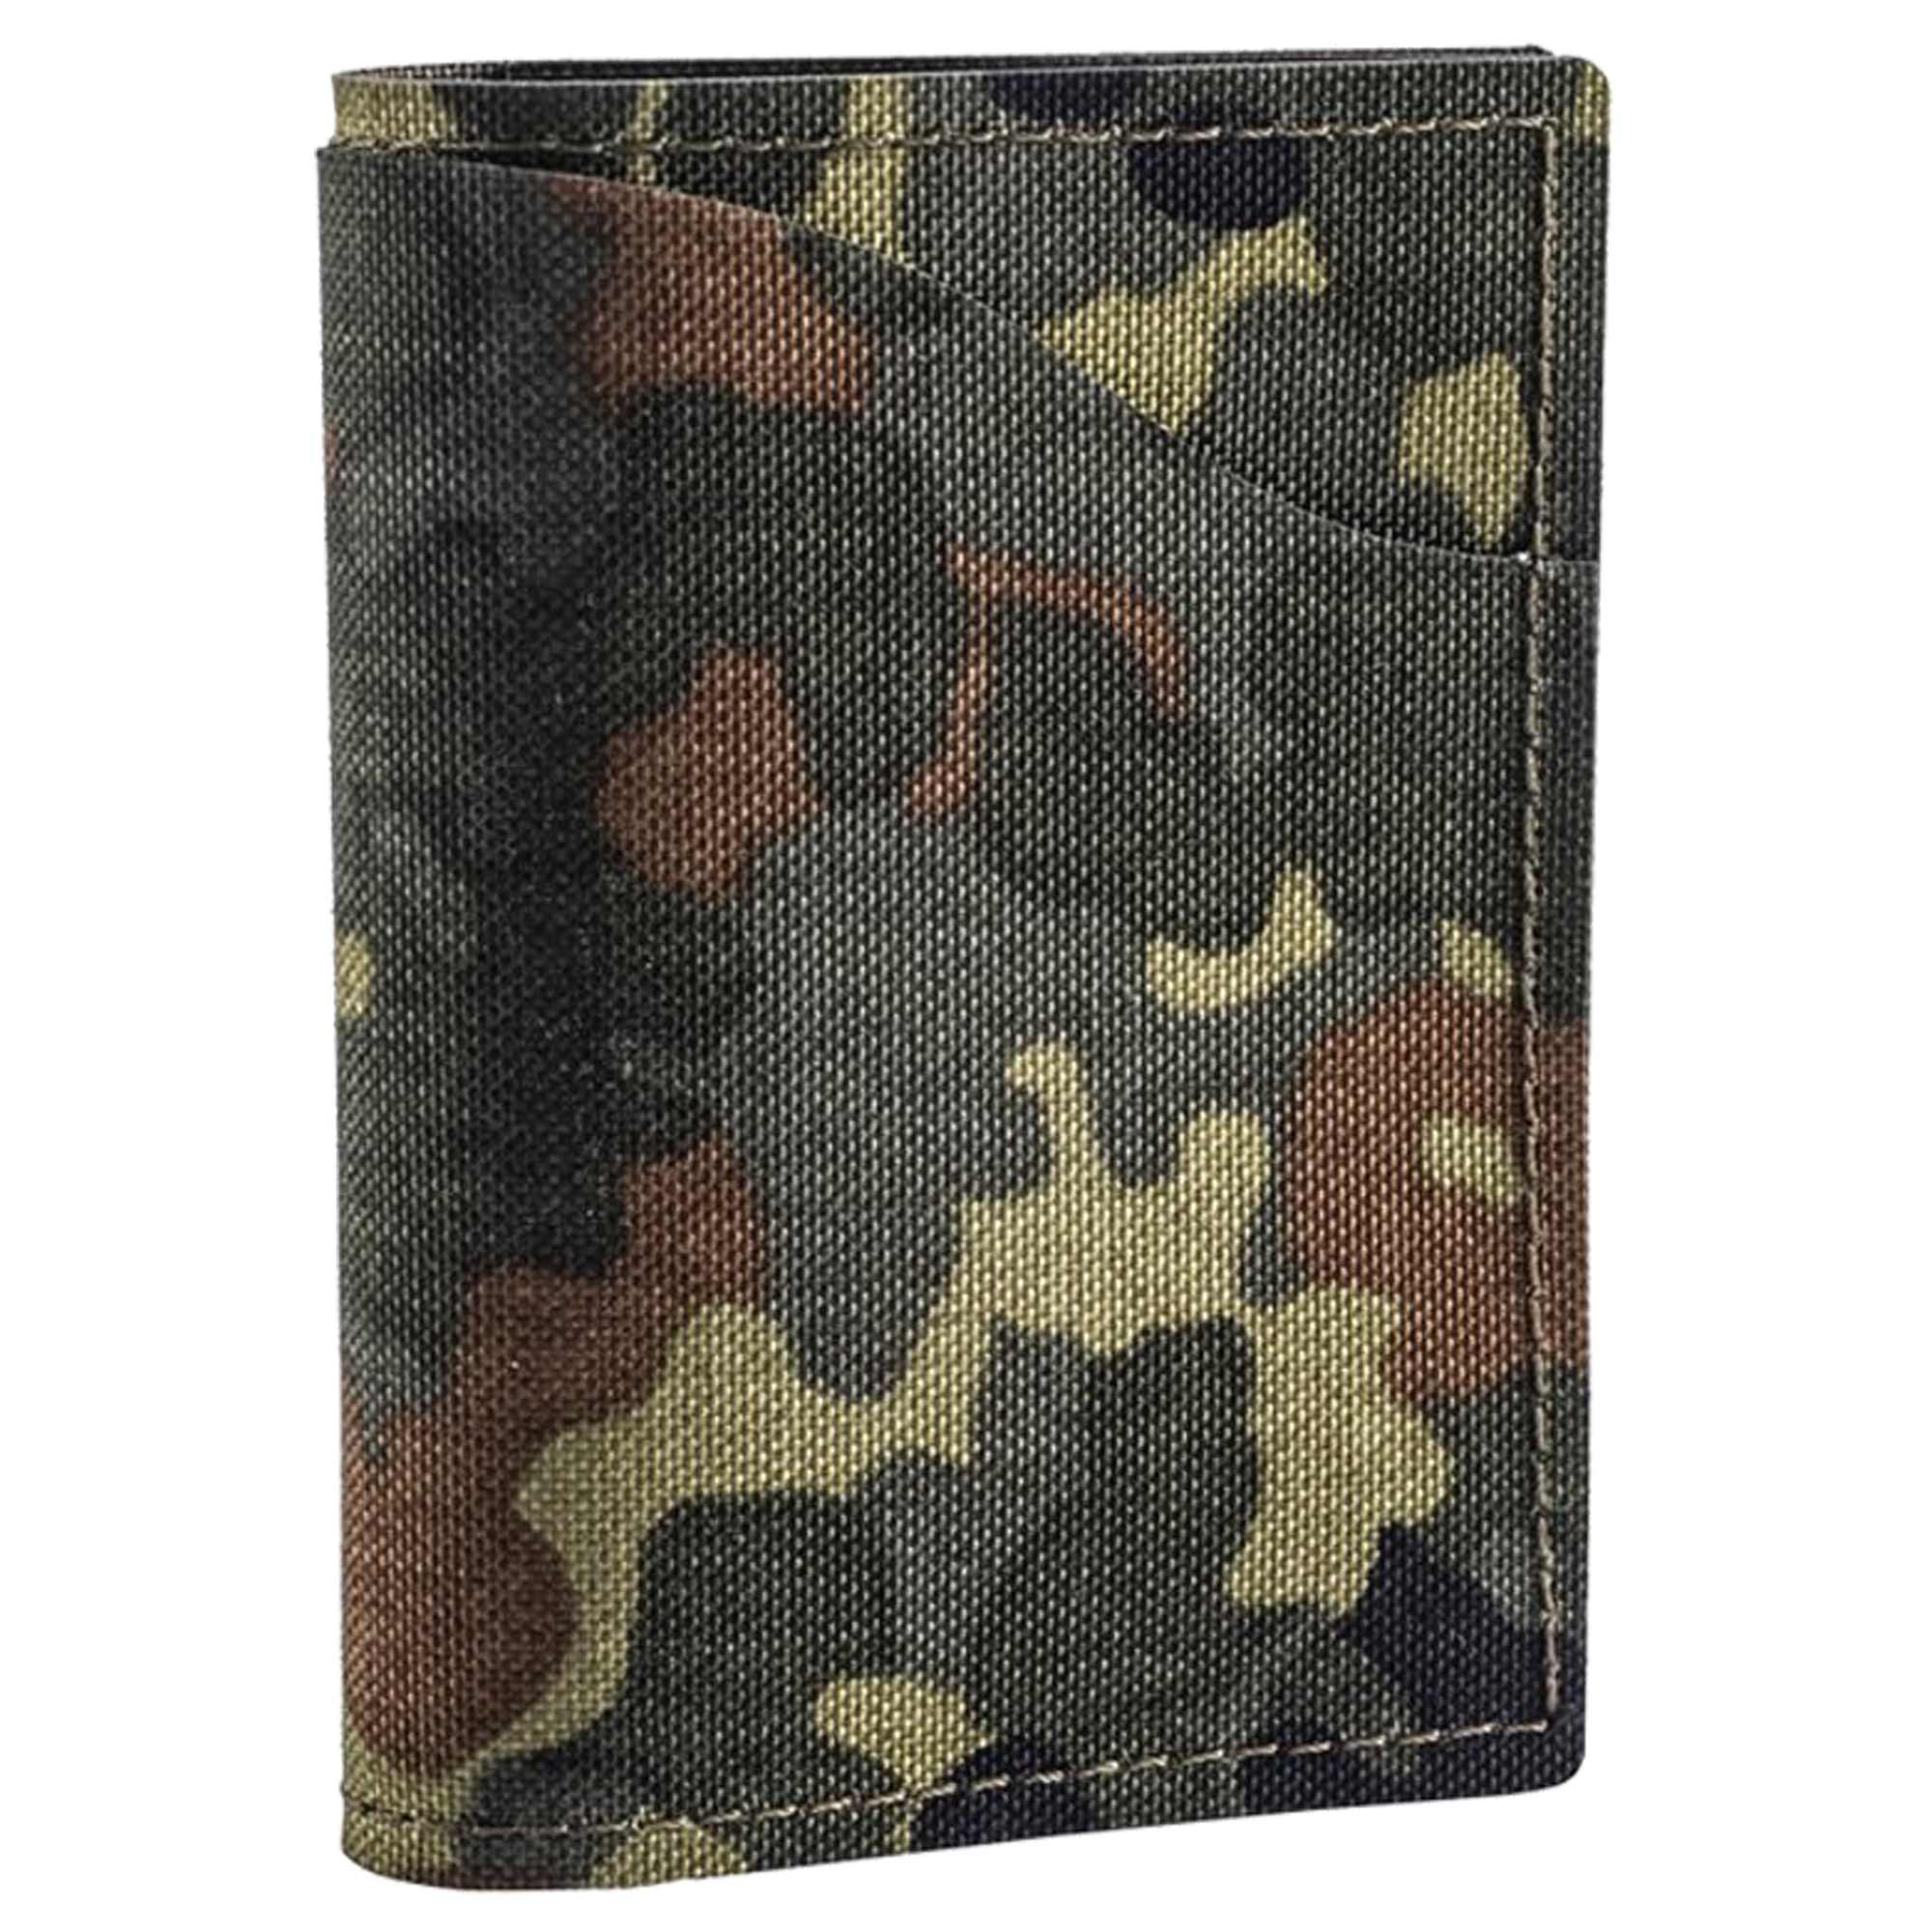 Purchase the MD-Textil Card Wallet 5 Color flecktarn by ASMC